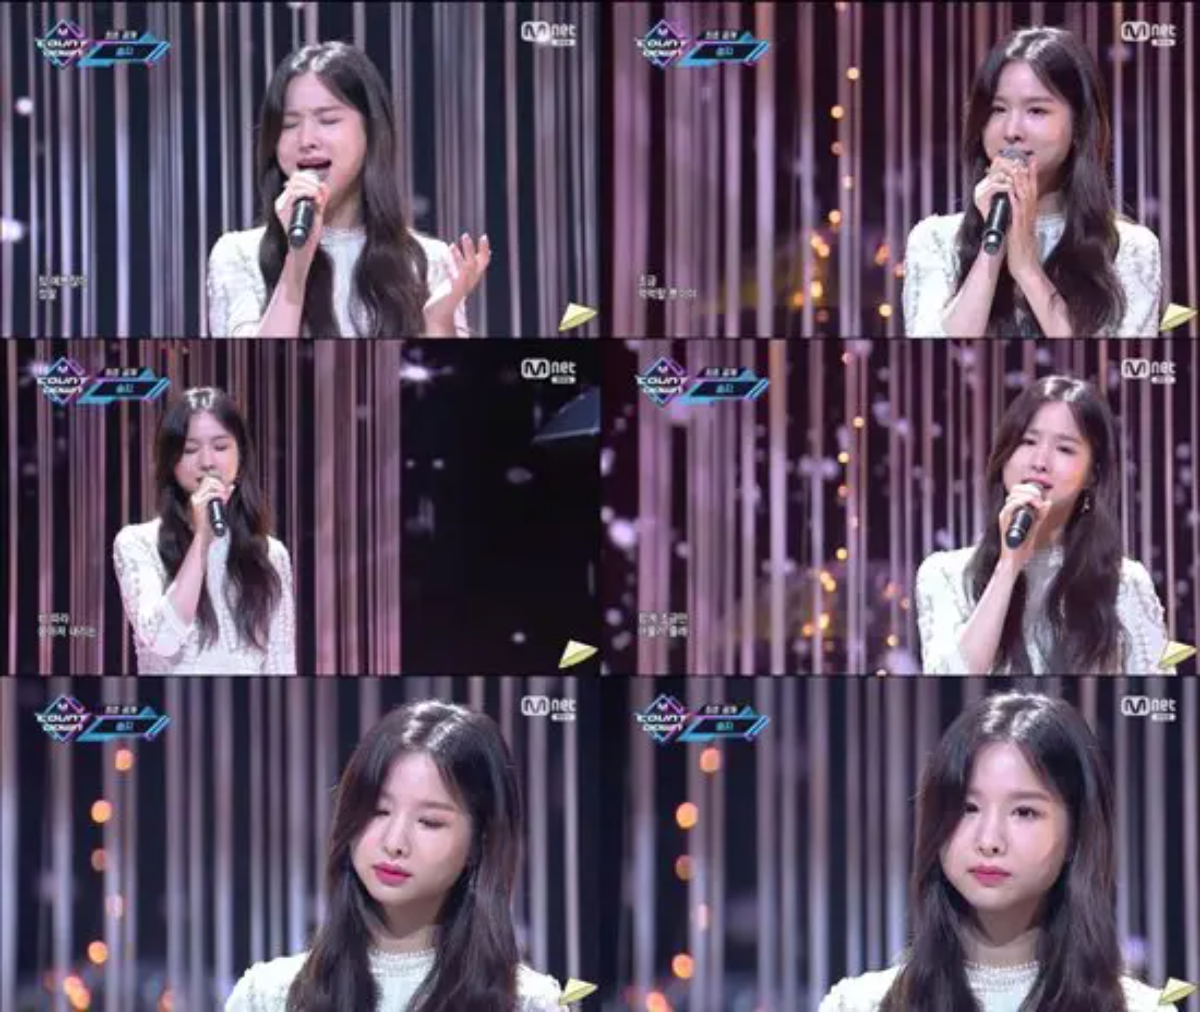 Solji, a new song comeback stage at M Countdown